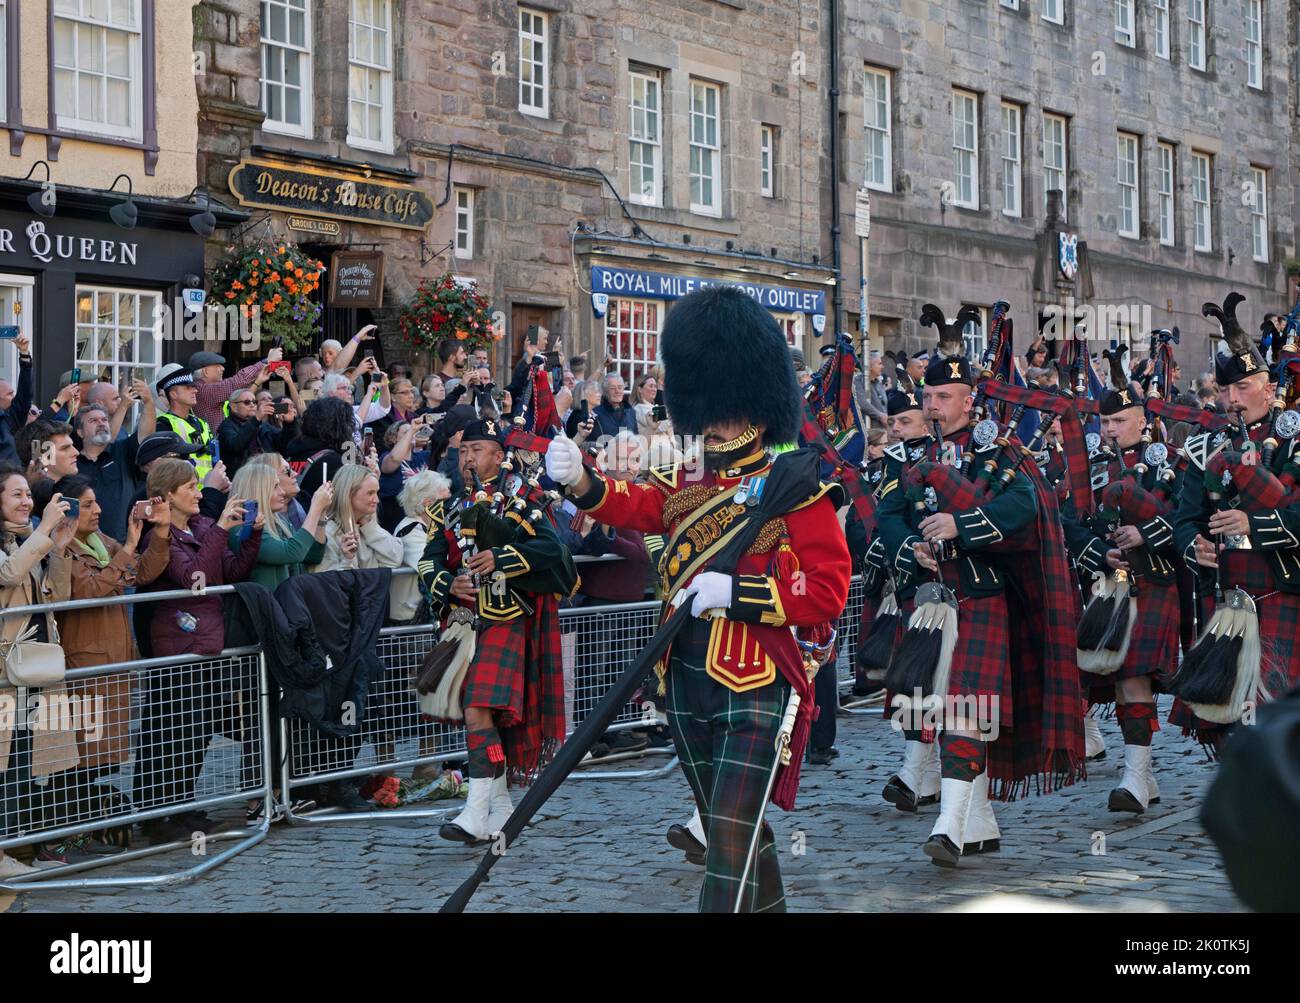 Royal Mile, Edinburgh, Scotland, UK. Royal Highland Fusiliers pipes and drums band march down Royal Mile as crowds gather for Coffin of Her Majesty Queen Elizabeth II departing St Giles Cathedral.13th September 2022. Credit: Arch White/alamy live news. Stock Photo